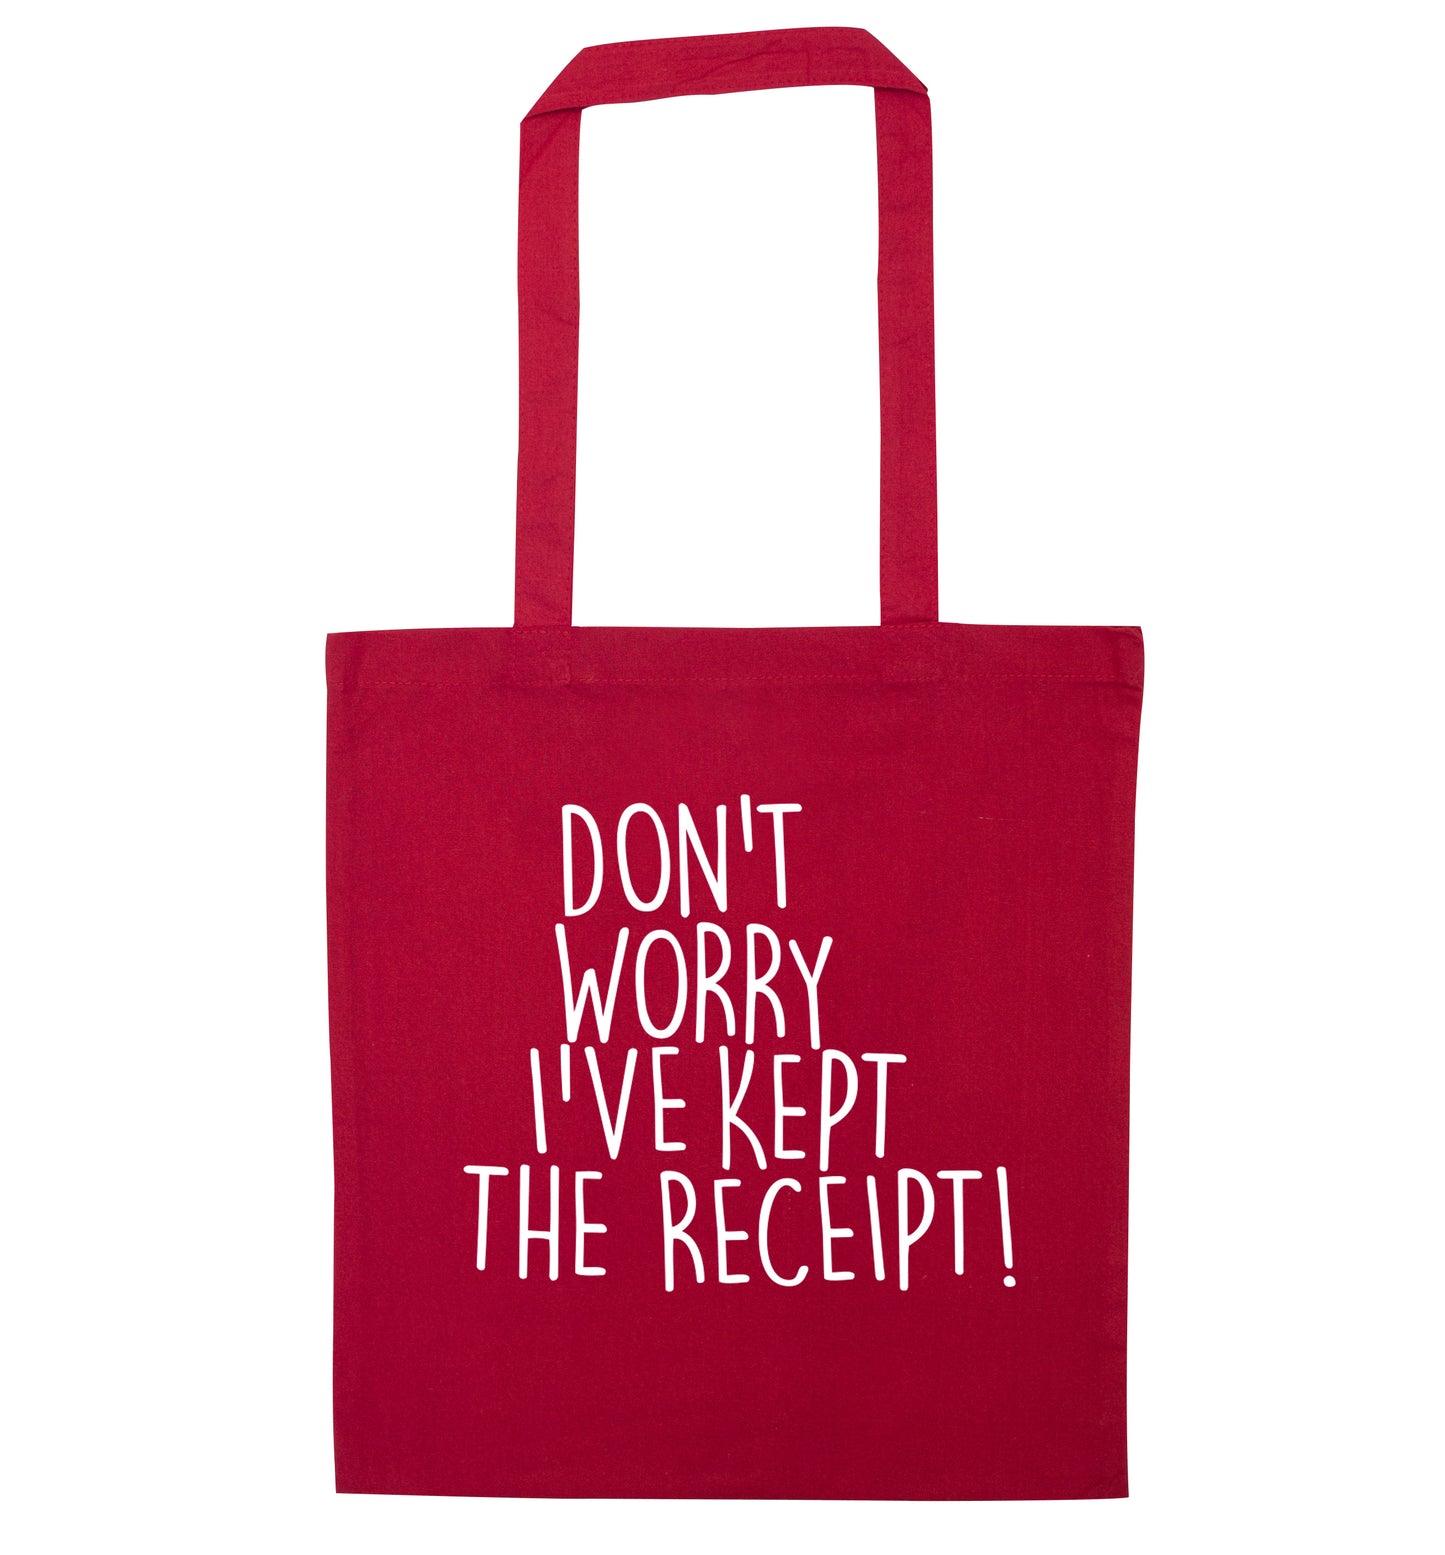 Don't Worry I've Kept the Receipt red tote bag